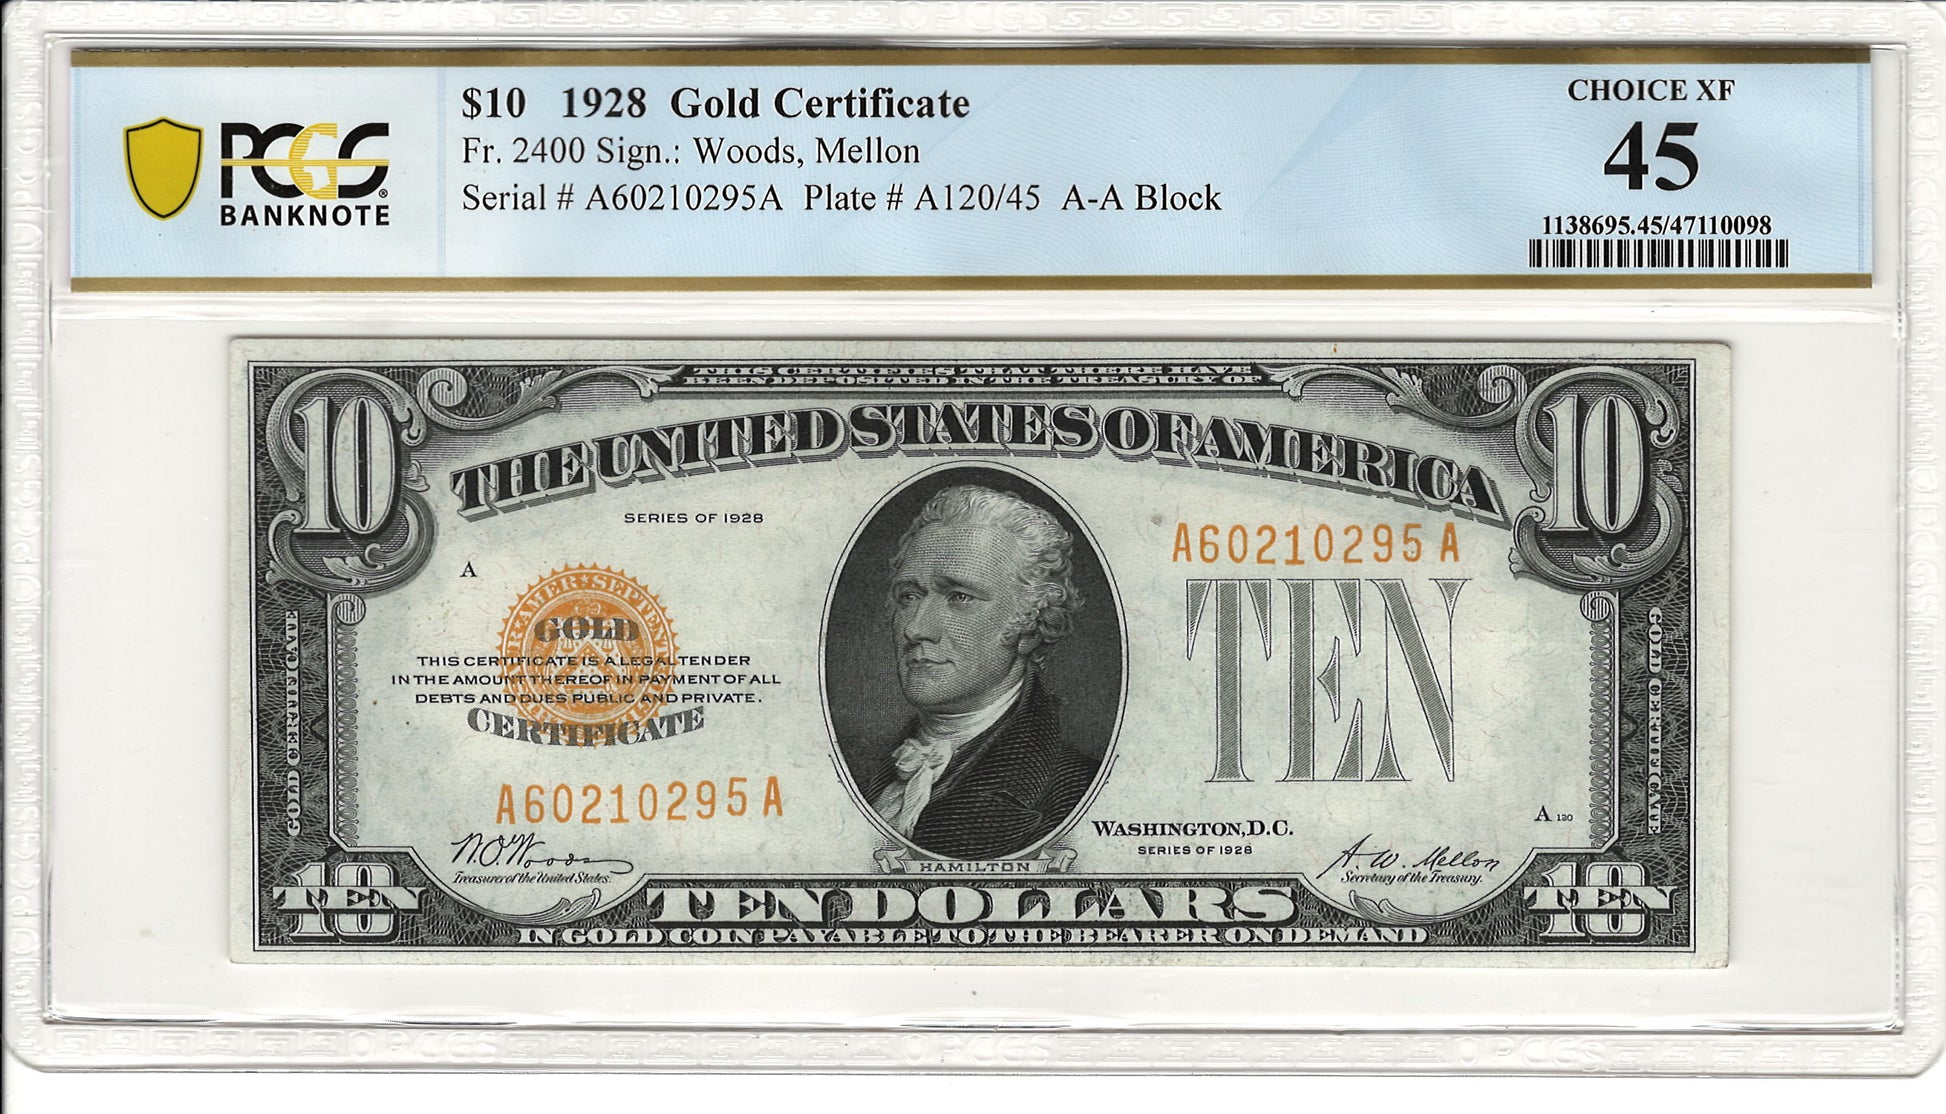 $10 1928 Gold Certificate PCGS Choice XF 45 Fr. 2400 Fronr